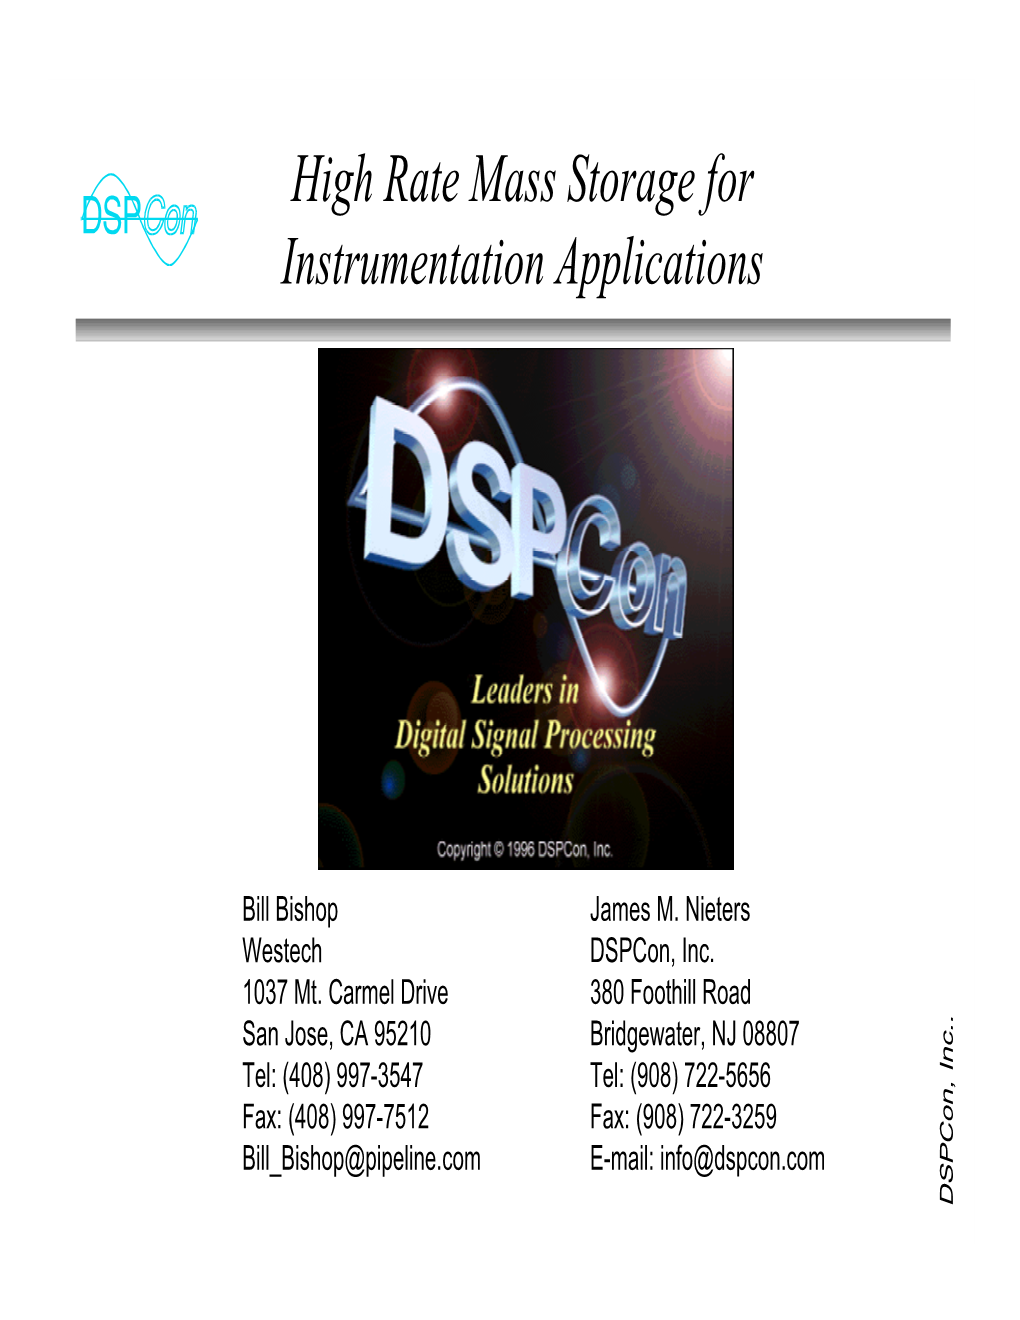 High Rate Mass Storage for Instrumentation Applications